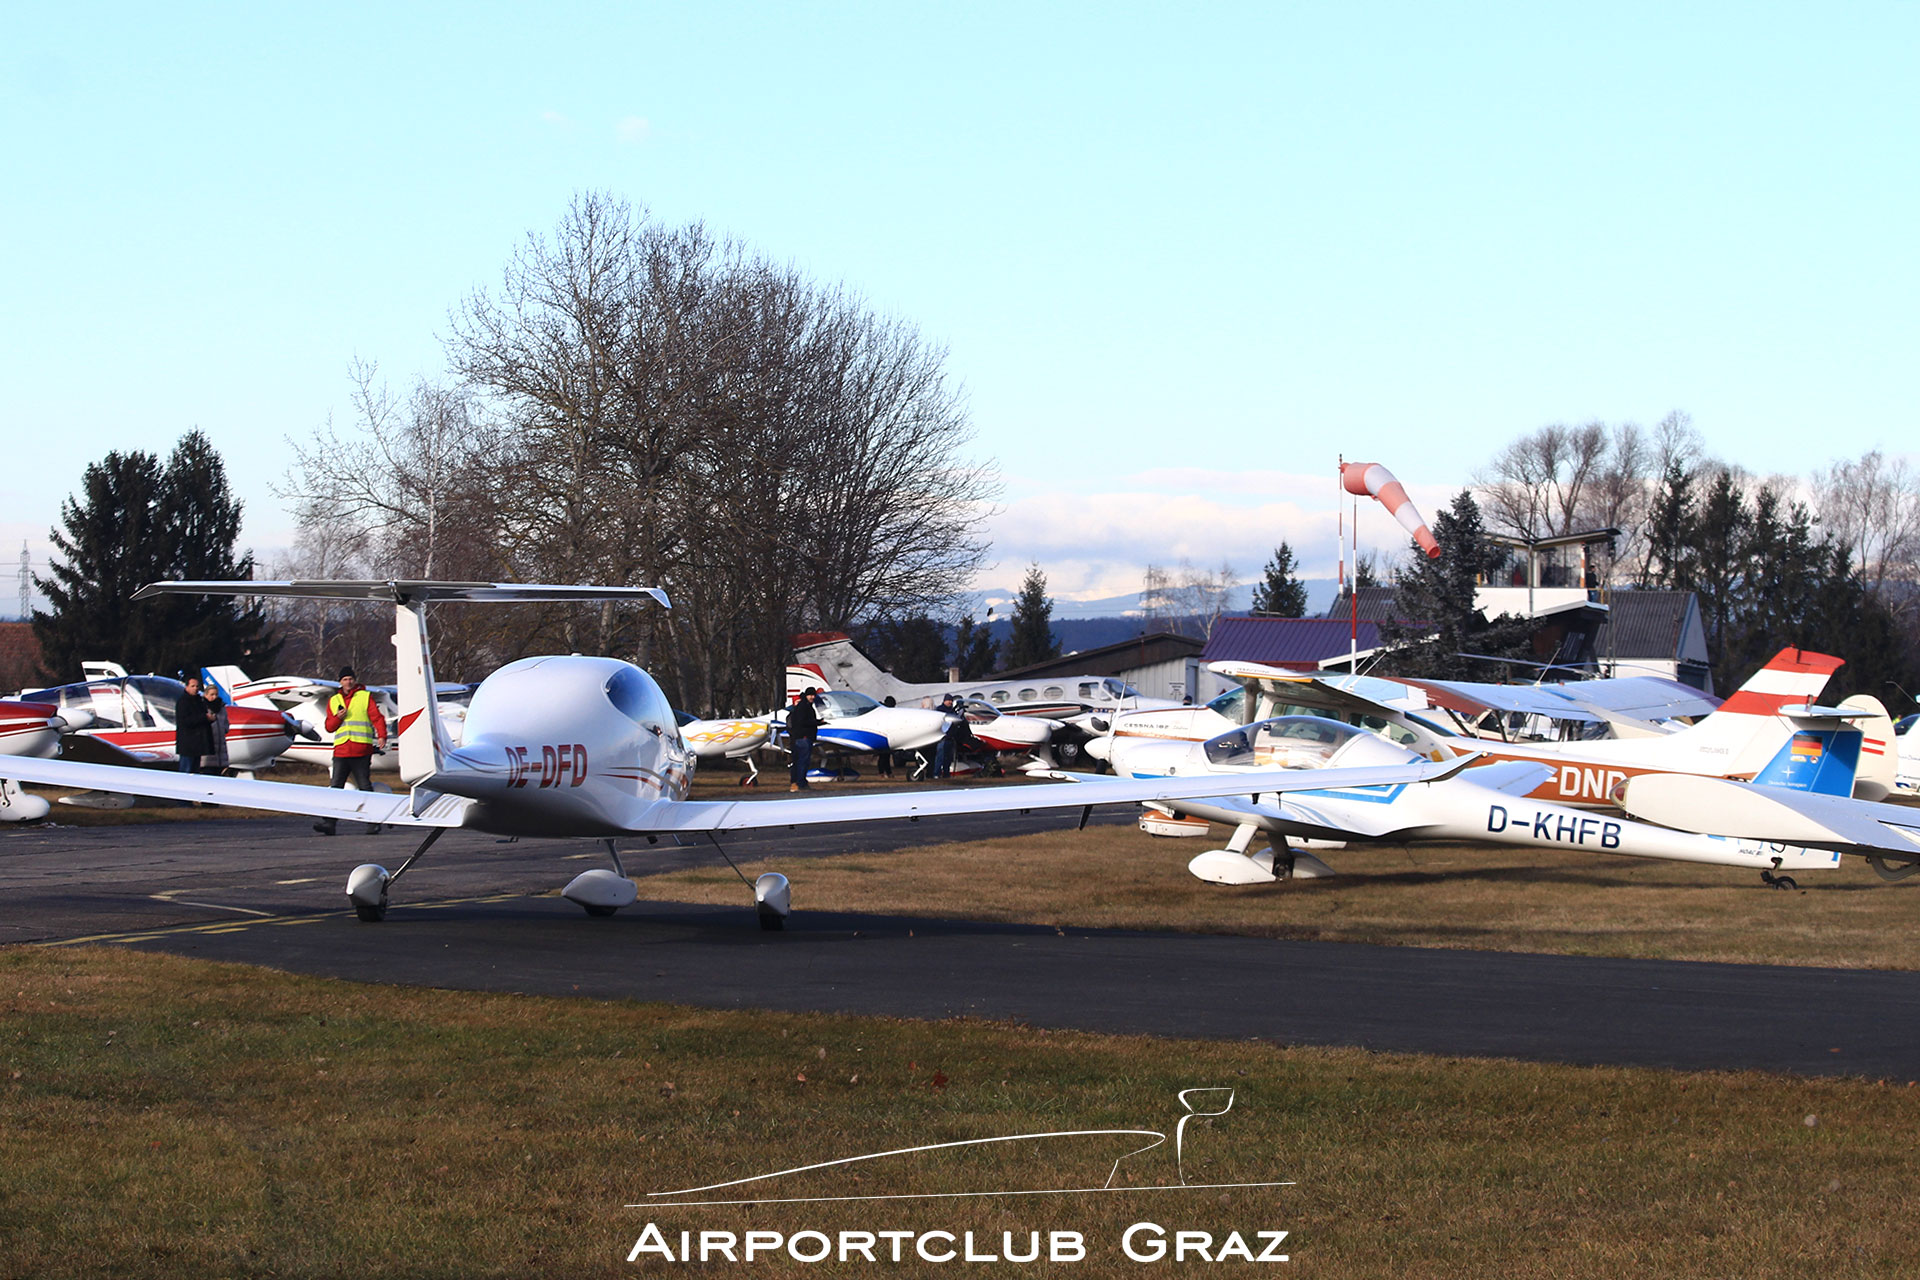 Airportclub Graz Silvester Fly-In Punitz